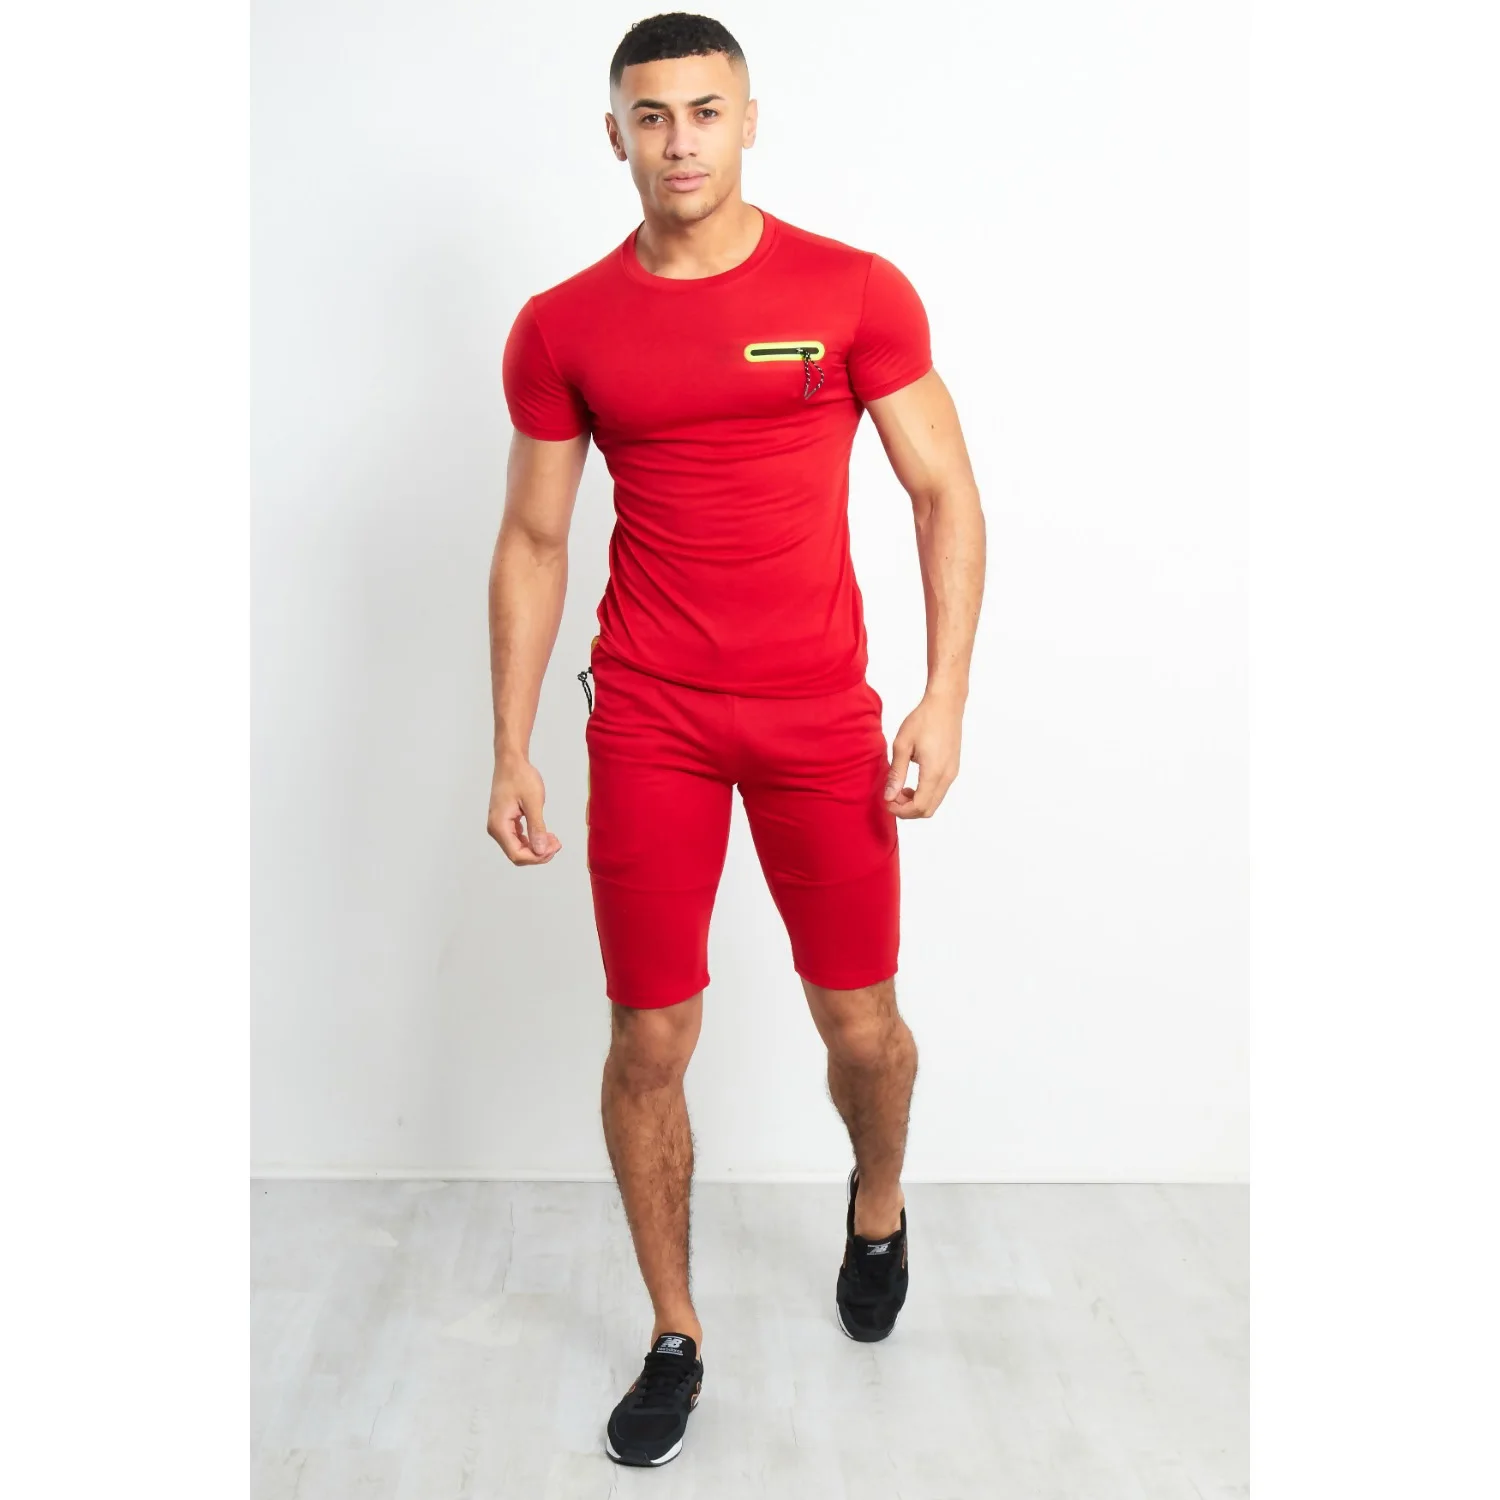 Two Piece Outfits for Men 2021 Sportswear Summer Short Sleeve T-Shirt and Shorts Sets Mens Sport Outdoor Tracksuit